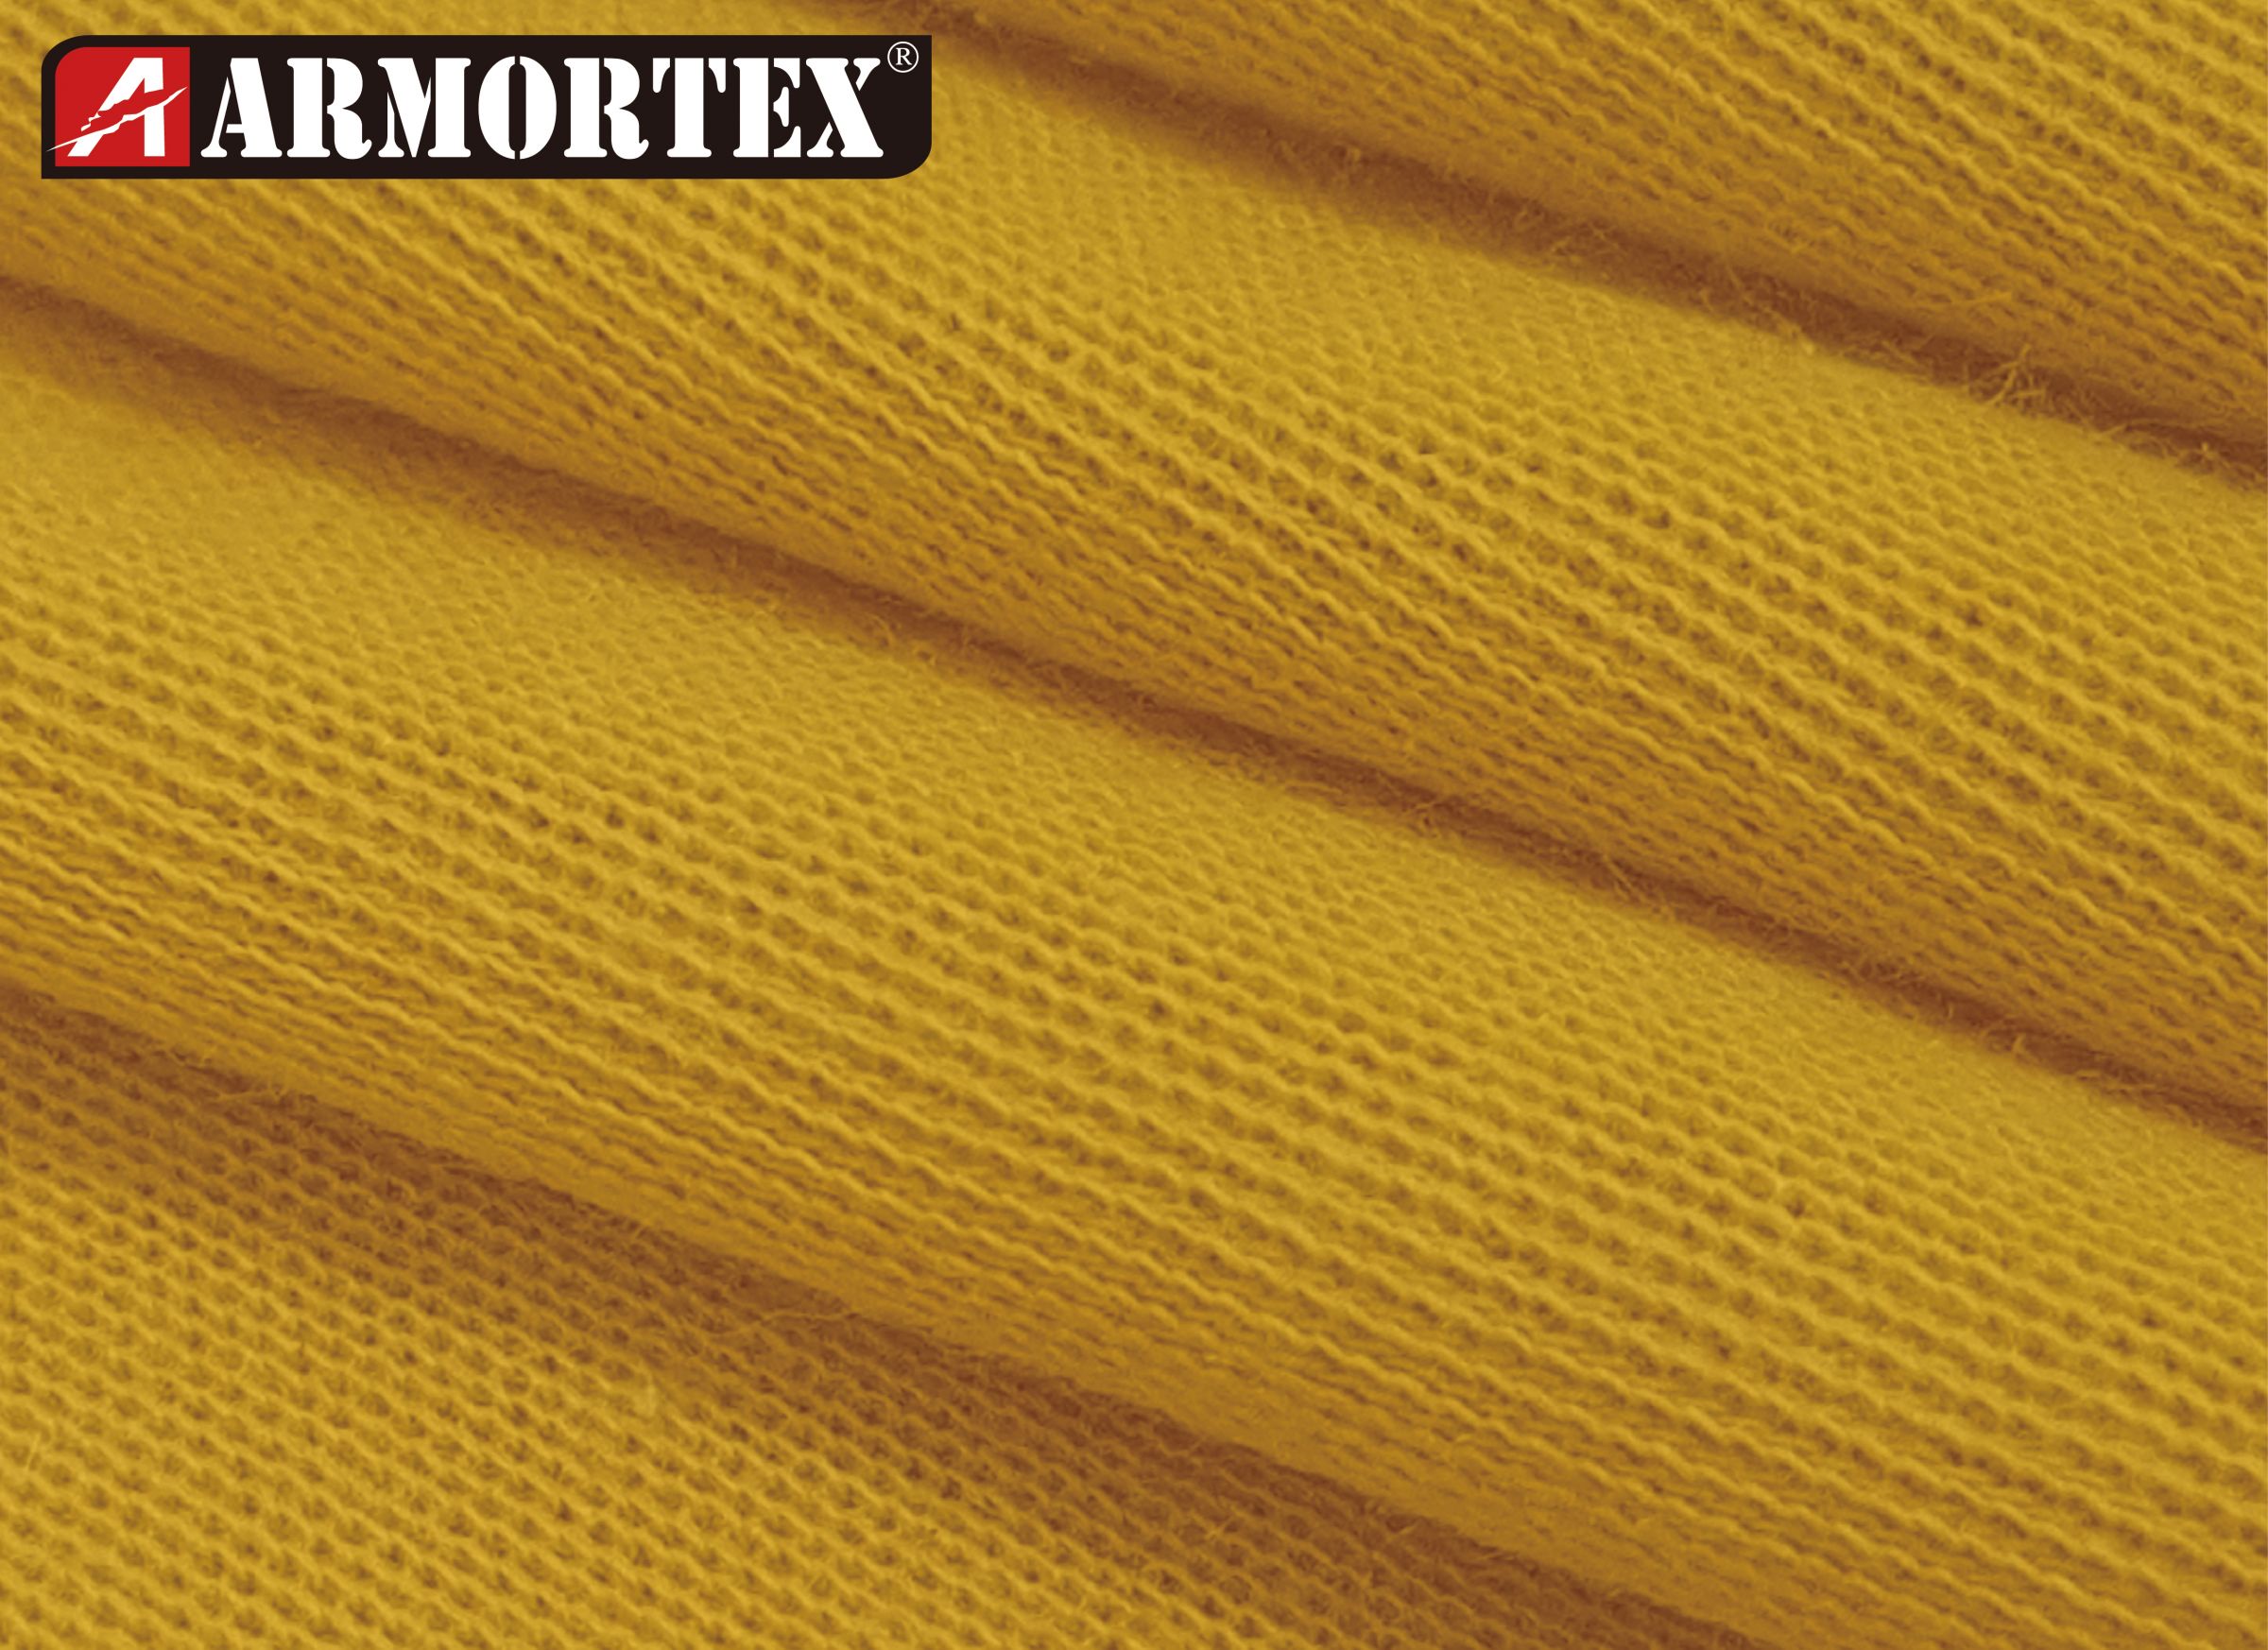 Fire Retardant Fabric Made with KEVLAR® Polyimide Blended - KEVLAR®  Polyimide Blended Fire Retardant Fabric, Made in Taiwan Textile Fabric  Manufacturer with ESG Reports